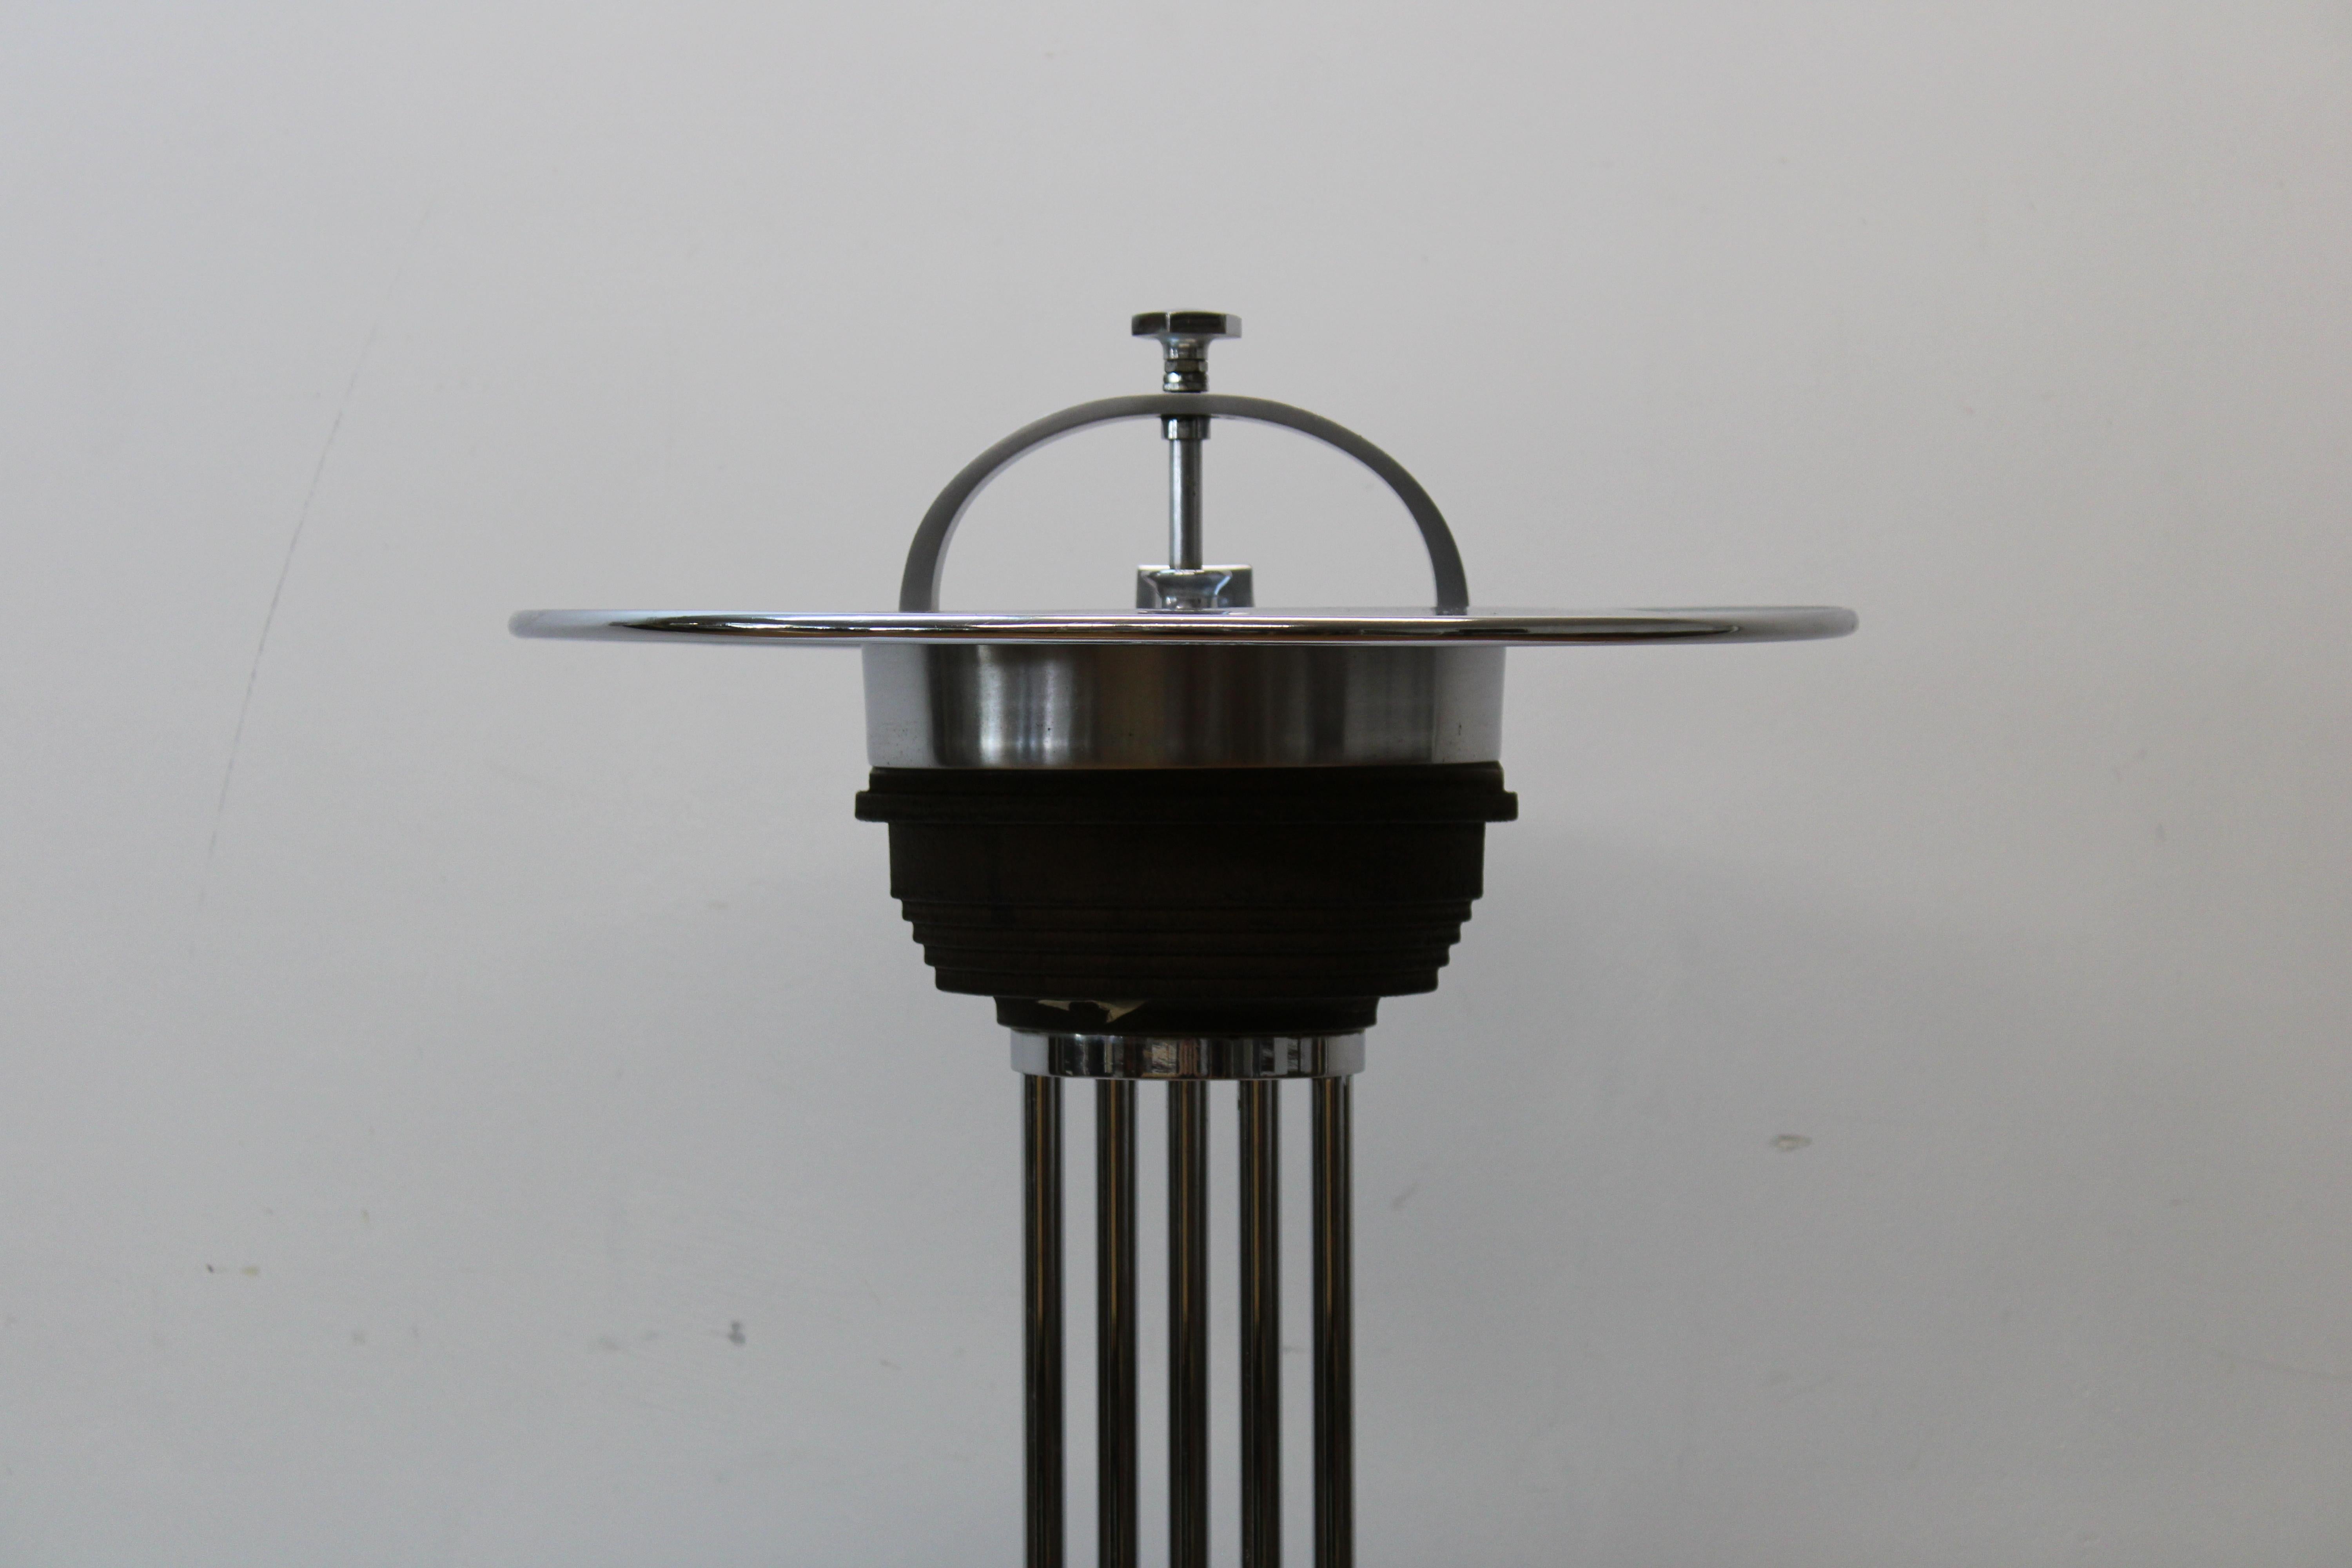 20th Century Art Deco Ashtray / Cocktail Smoker Stand Designed By W.J Campbell